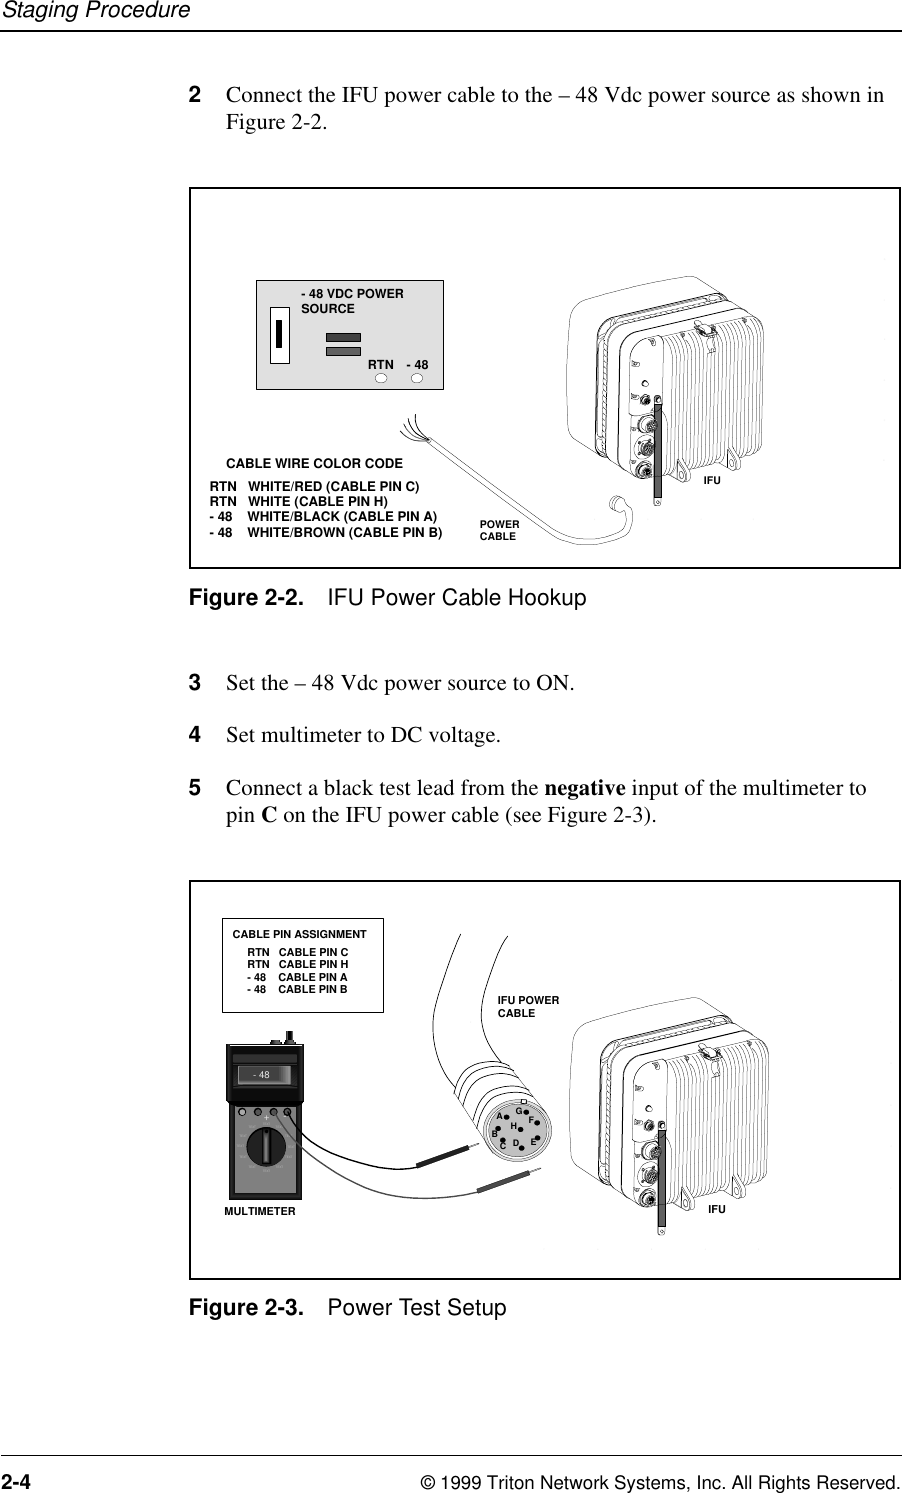 Staging Procedure2-4 © 1999 Triton Network Systems, Inc. All Rights Reserved.2Connect the IFU power cable to the – 48 Vdc power source as shown in Figure 2-2.Figure 2-2. IFU Power Cable Hookup3Set the – 48 Vdc power source to ON. 4Set multimeter to DC voltage.5Connect a black test lead from the negative input of the multimeter to pin C on the IFU power cable (see Figure 2-3).Figure 2-3. Power Test Setup34567DCBEFGIFUPOWERCABLE- 48 VDC POWERSOURCE- 48RTNRTN   WHITE/RED (CABLE PIN C)RTN   WHITE (CABLE PIN H)- 48    WHITE/BLACK (CABLE PIN A)- 48    WHITE/BROWN (CABLE PIN B)CABLE WIRE COLOR CODE34DC567EFDCBEFGTEXTTEXTTEXT T EXTTEXT T EXTTEXT TEXTTEXT TEXTTEXTTEXT- 48+- MULTIMETER IFURTN   CABLE PIN CRTN   CABLE PIN H- 48    CABLE PIN A- 48    CABLE PIN BCABLE PIN ASSIGNMENTIFU POWERCABLEAEDCBHGF